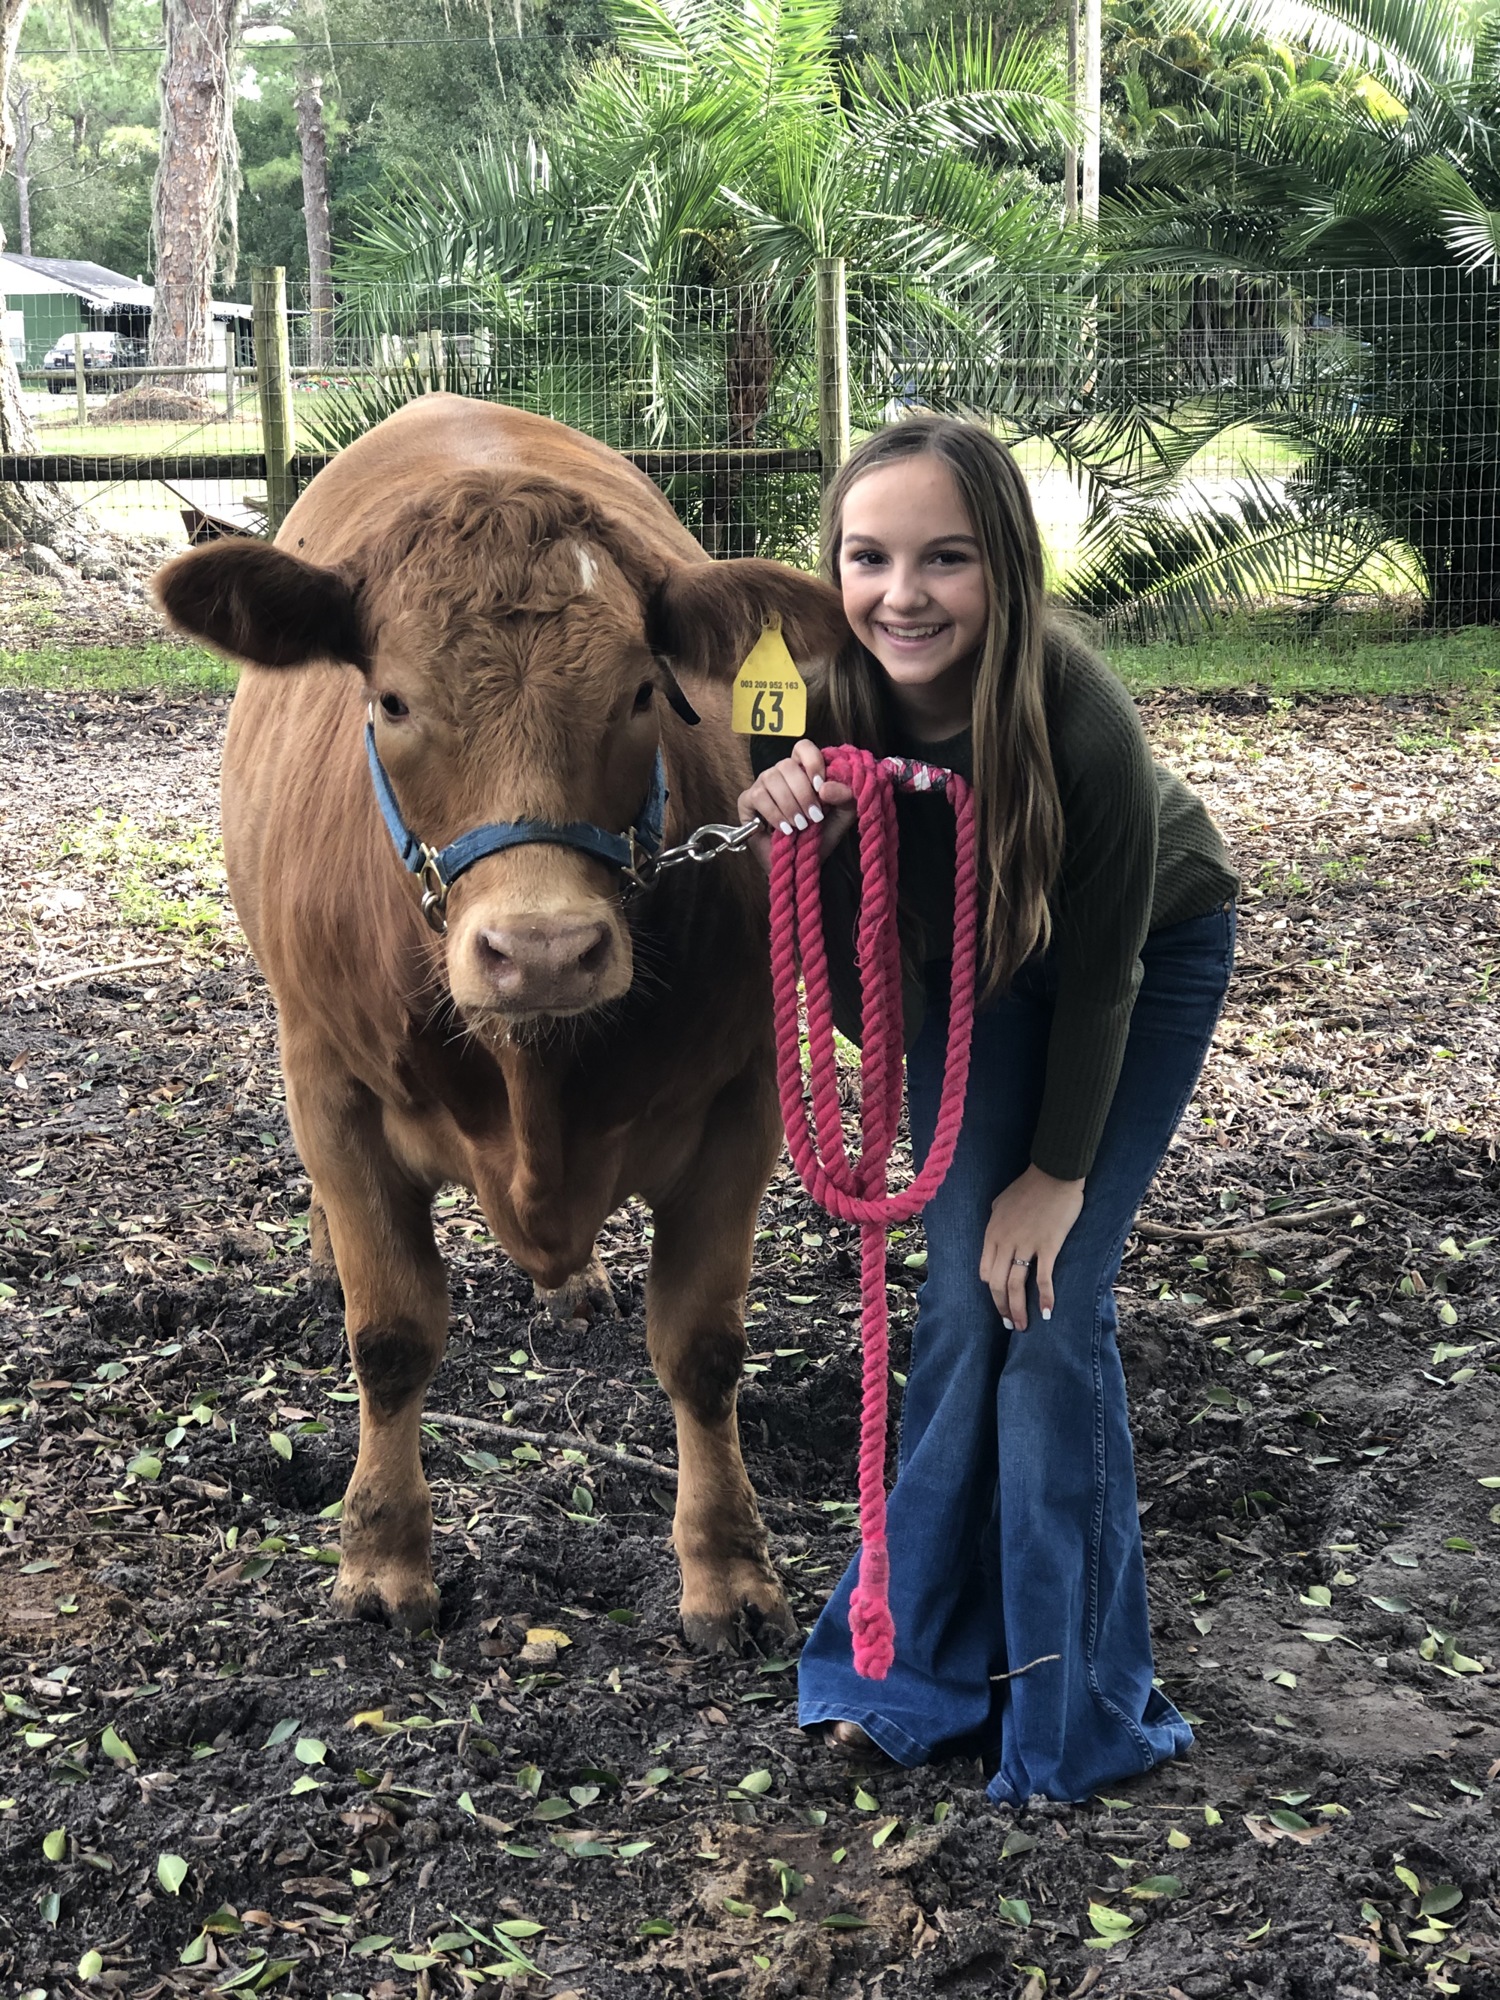 Shaylynn Davis, a sophomore at Braden River High School, purchased her steer, Cleetus, from her grandfather, Jim Parks. Davis will show Cleetus at the Manatee County Fair this year. Courtesy photo.